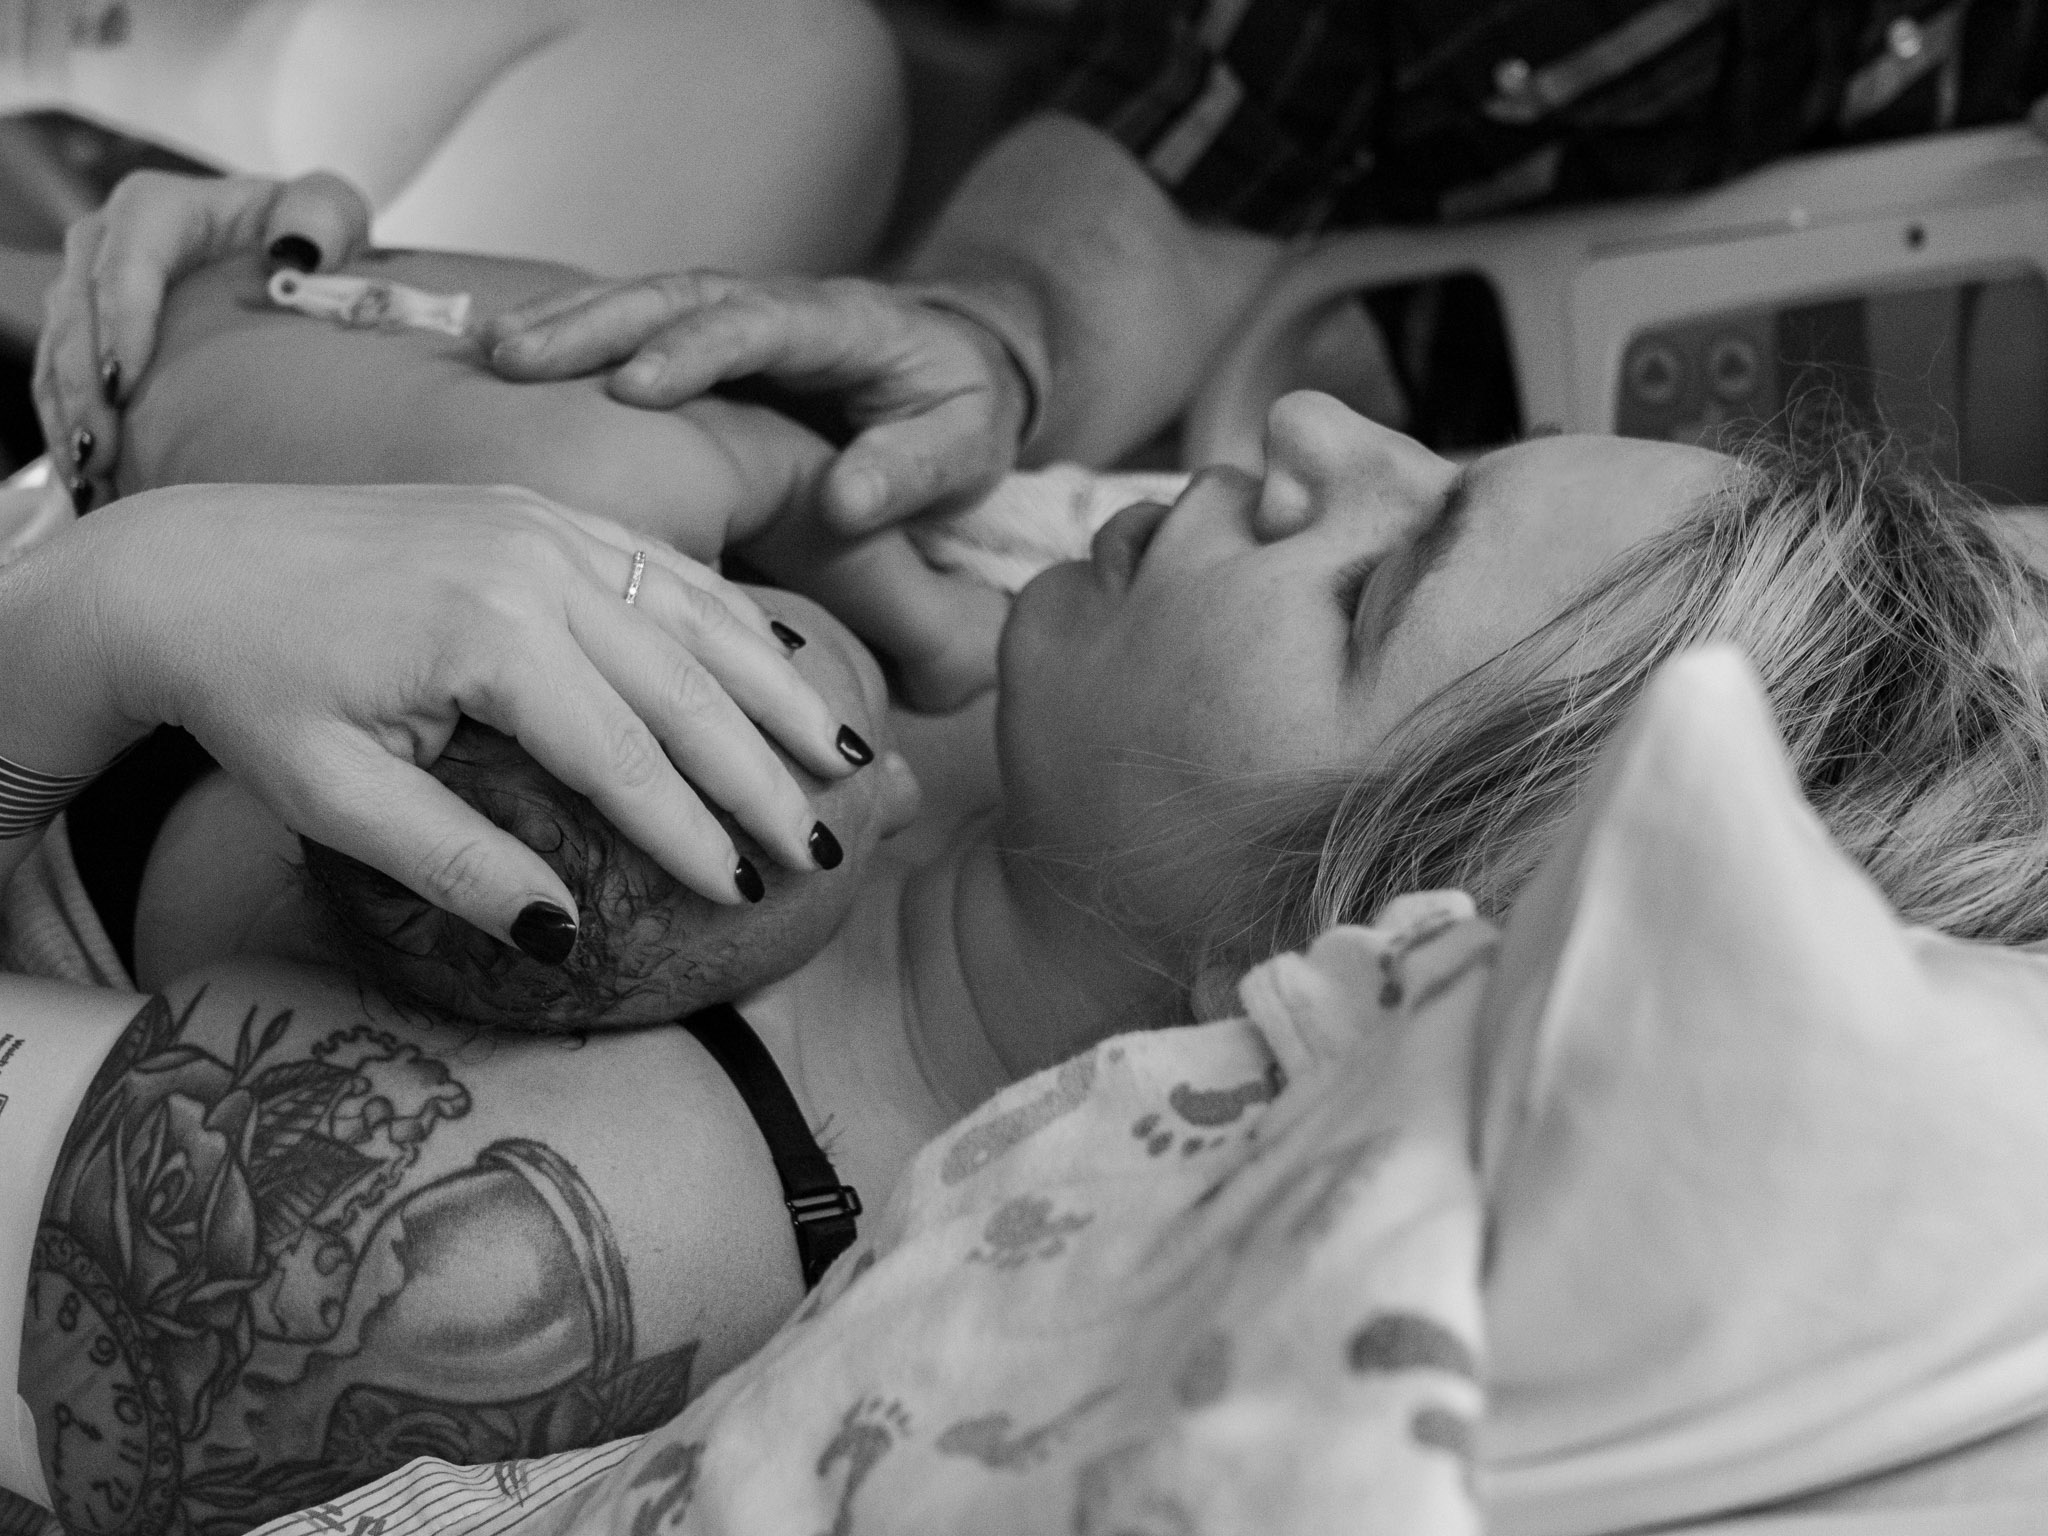 Mother holding baby skin-to-skin after giving birth at Overlake Childbirth Center in Bellevue, WA.